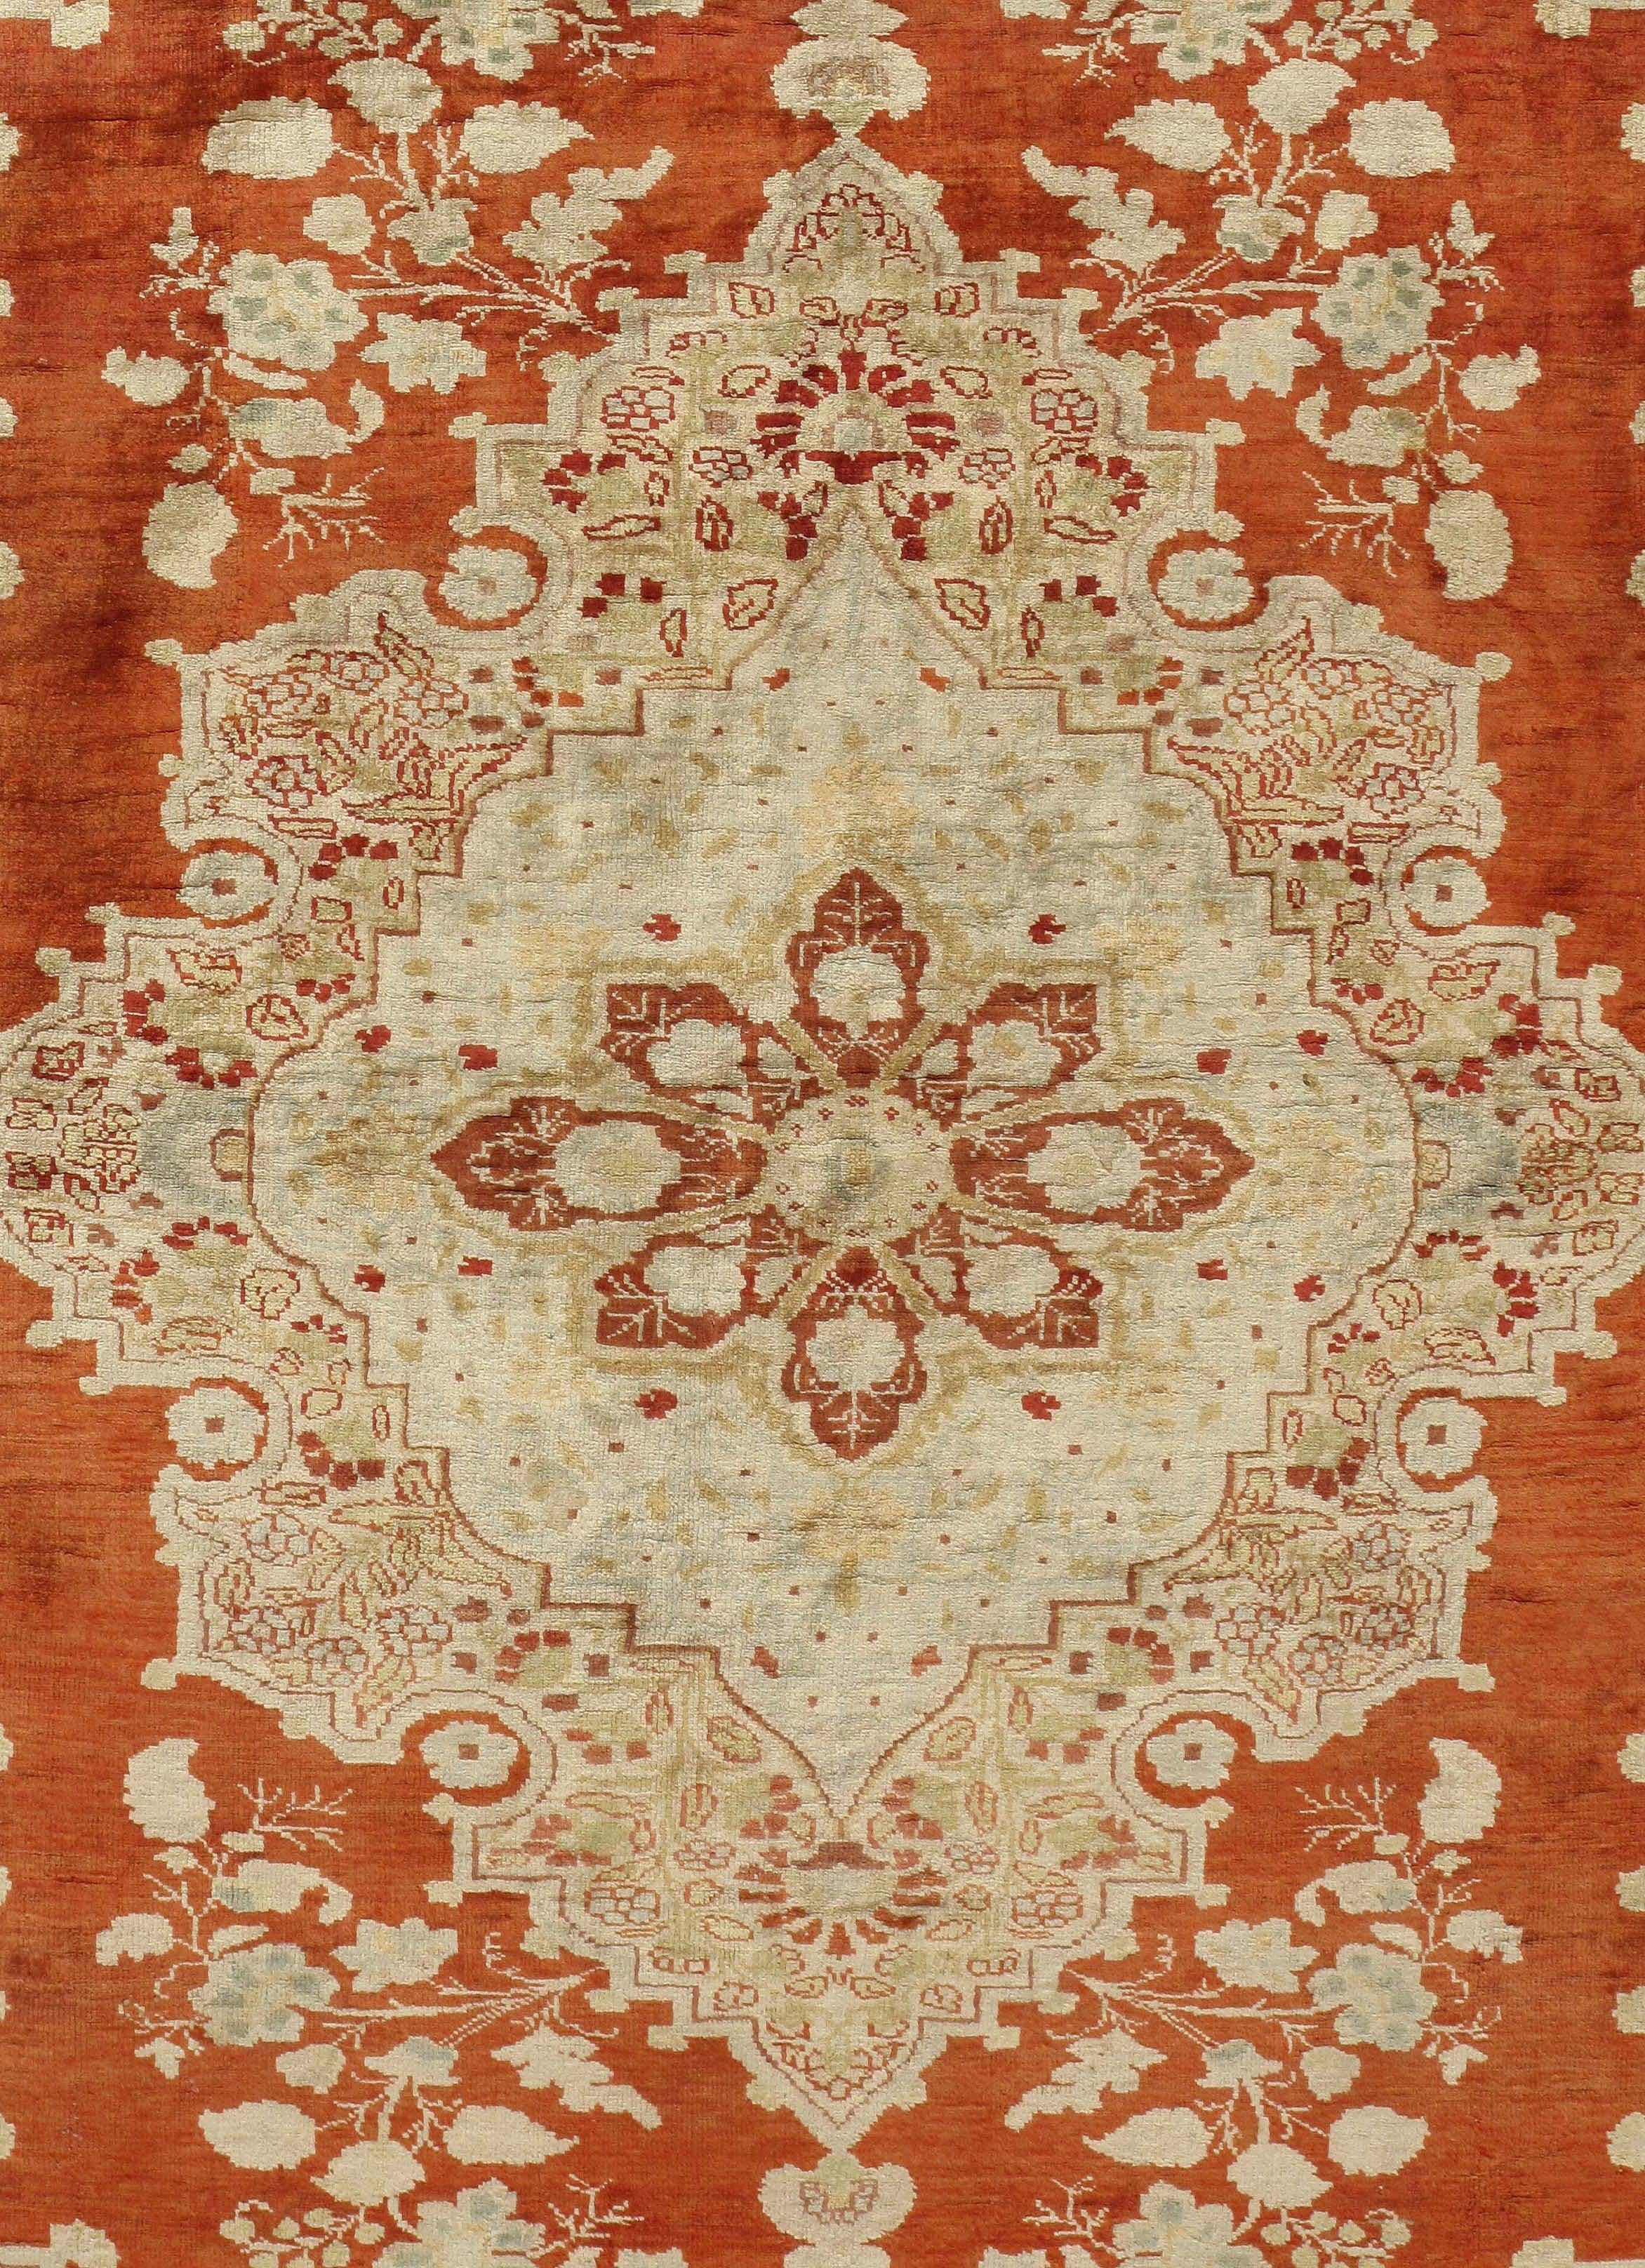 Antique Persian beige silk Tabriz rug. Size: 4'2 x 5'7. This is a Classic silk Tabriz from the most desirable period of Tabriz weaving. The complex layered medallion is framed by extended quarter motives in the traditional style. The rust red field